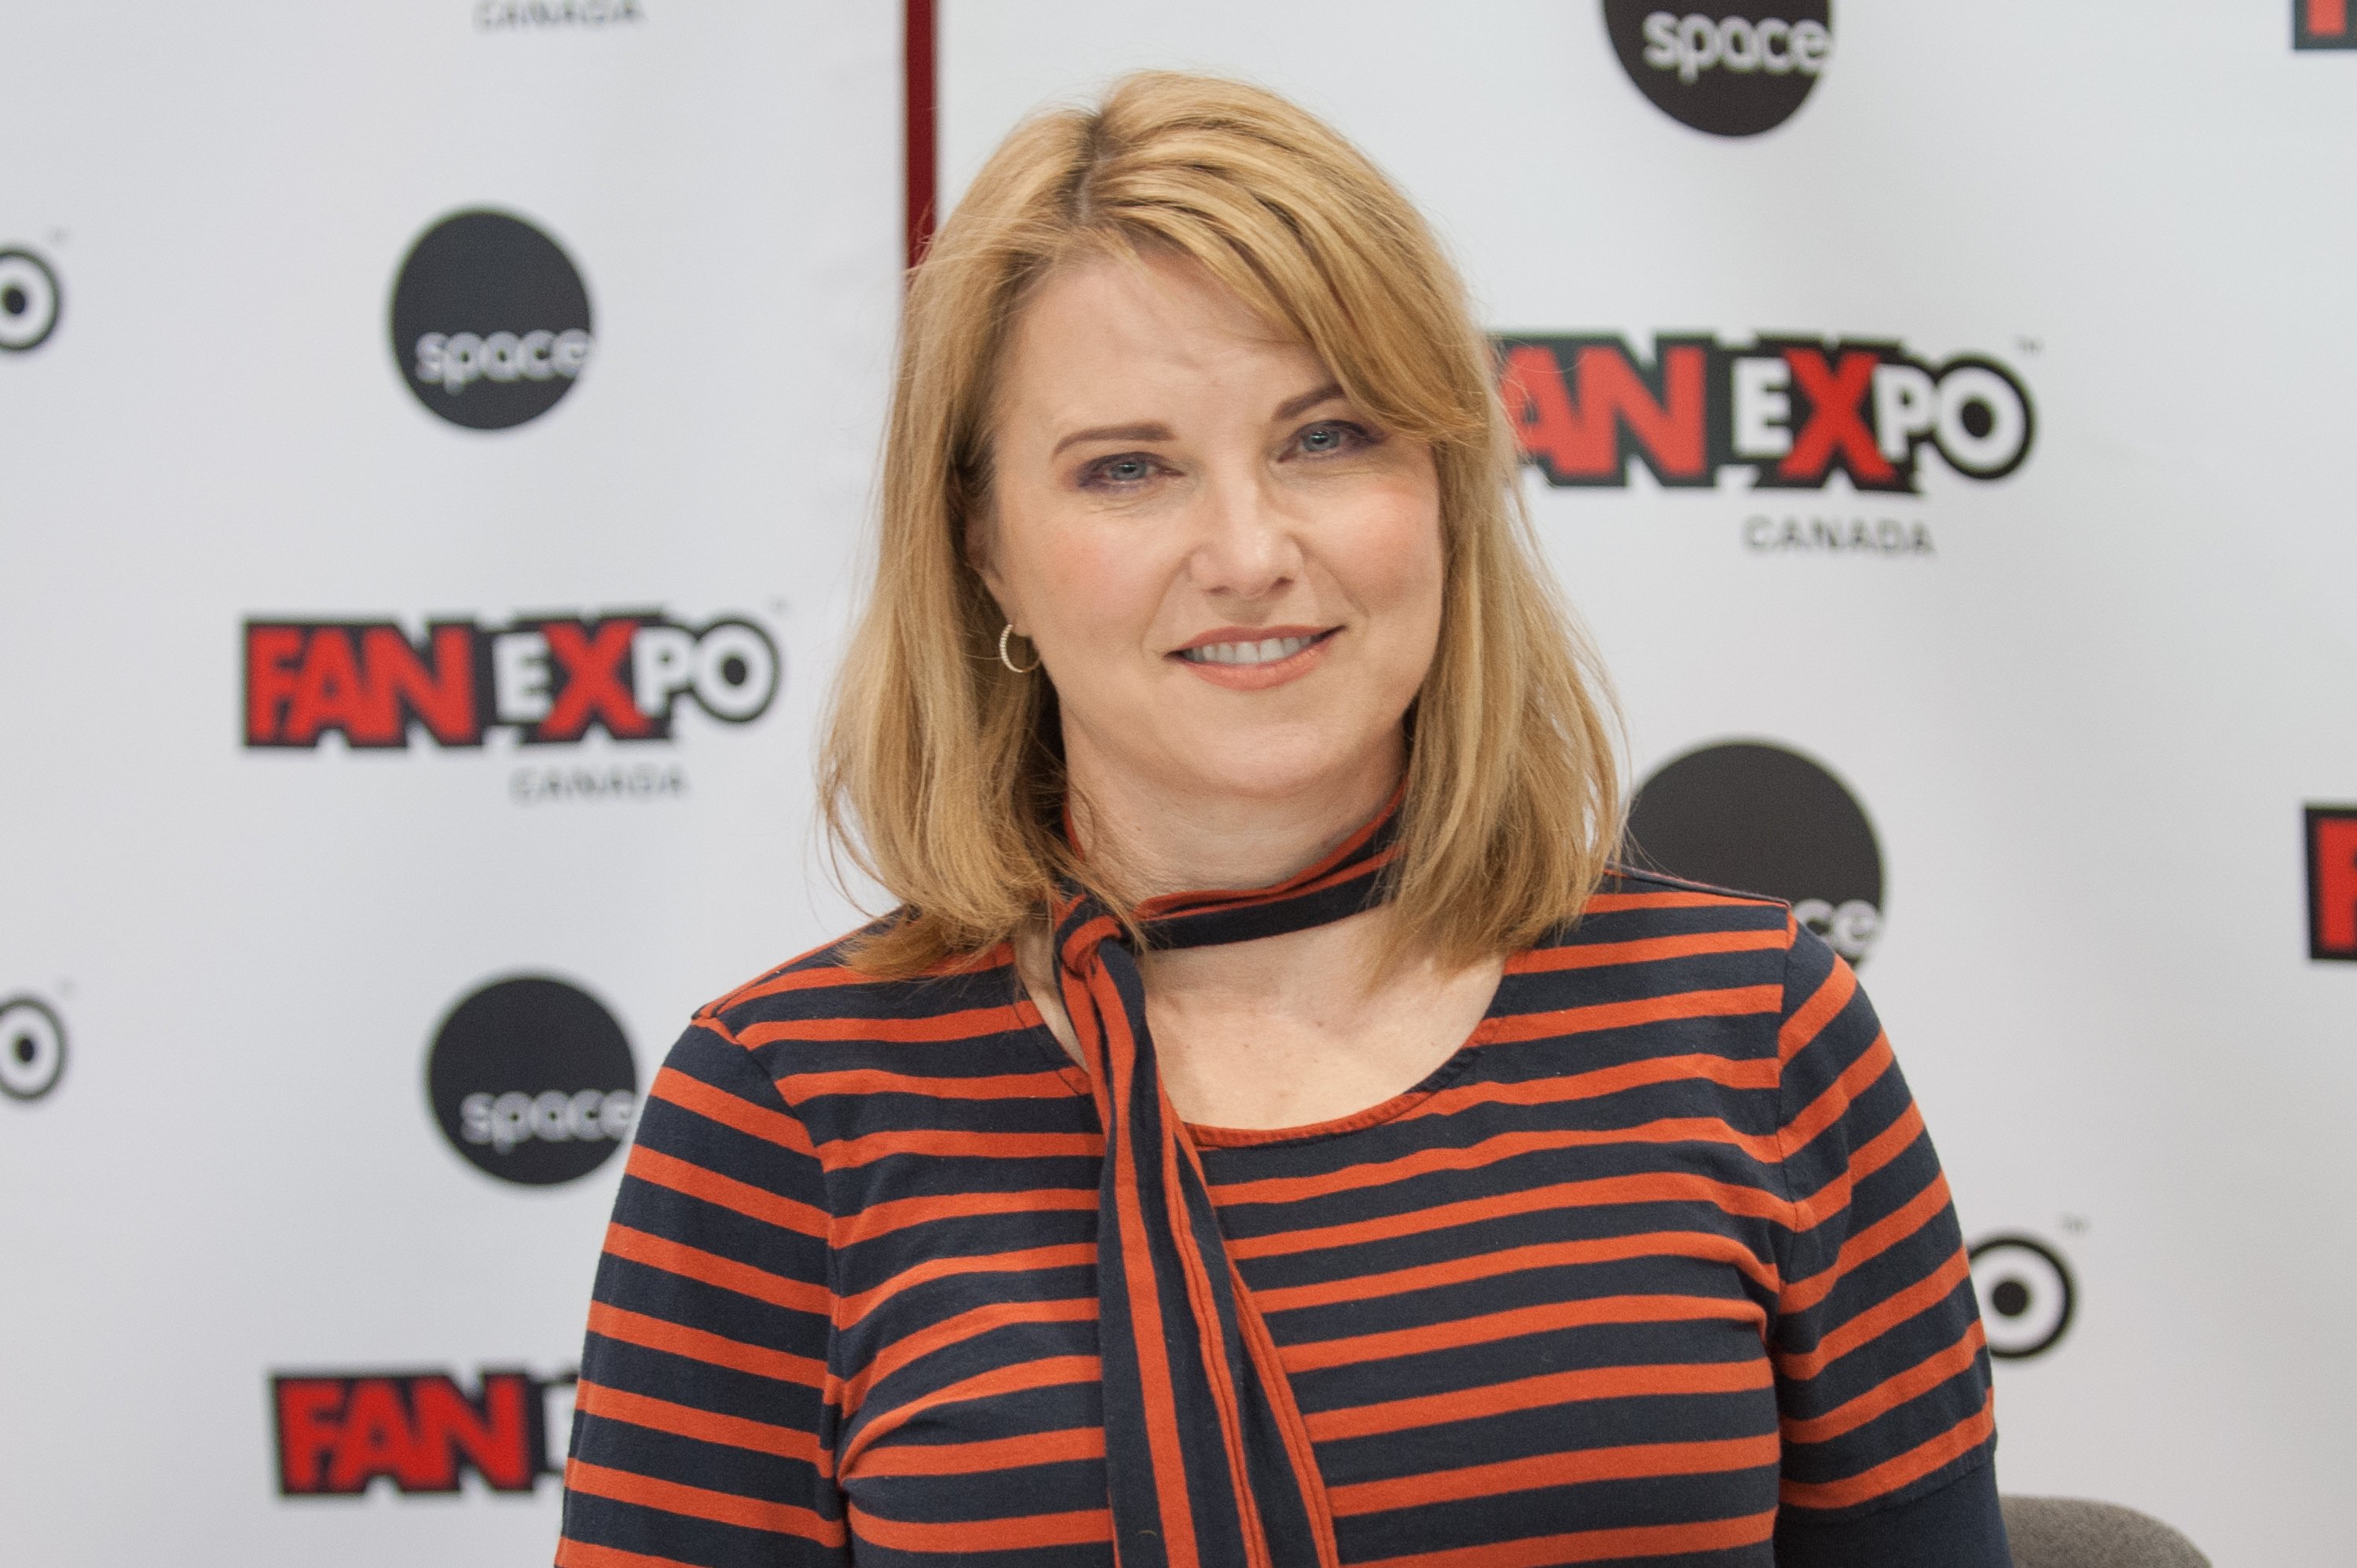 Lucy Lawless nimmt an der Fan Expo 2018 2018 im Metro Toronto Convention Centre am 1. September 2018 in Toronto, Kanada teil. | Quelle: Getty Images